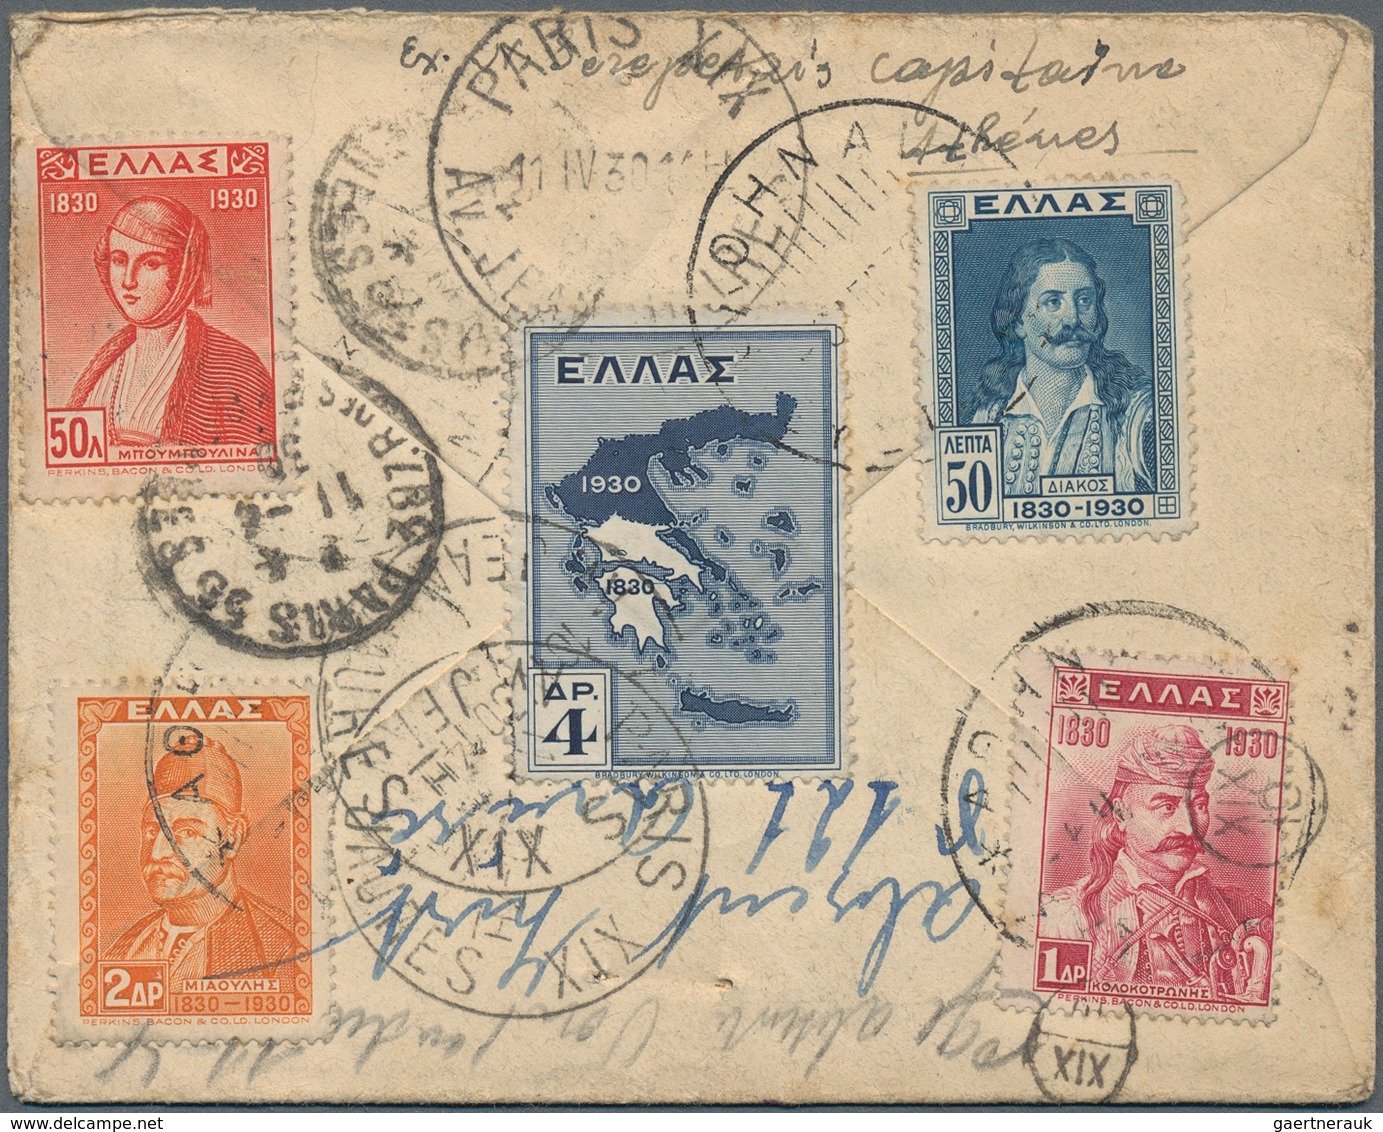 Griechenland: 1920/1950 (ca.), assortment of more than 50 covers/cards, stronger postal wear but int